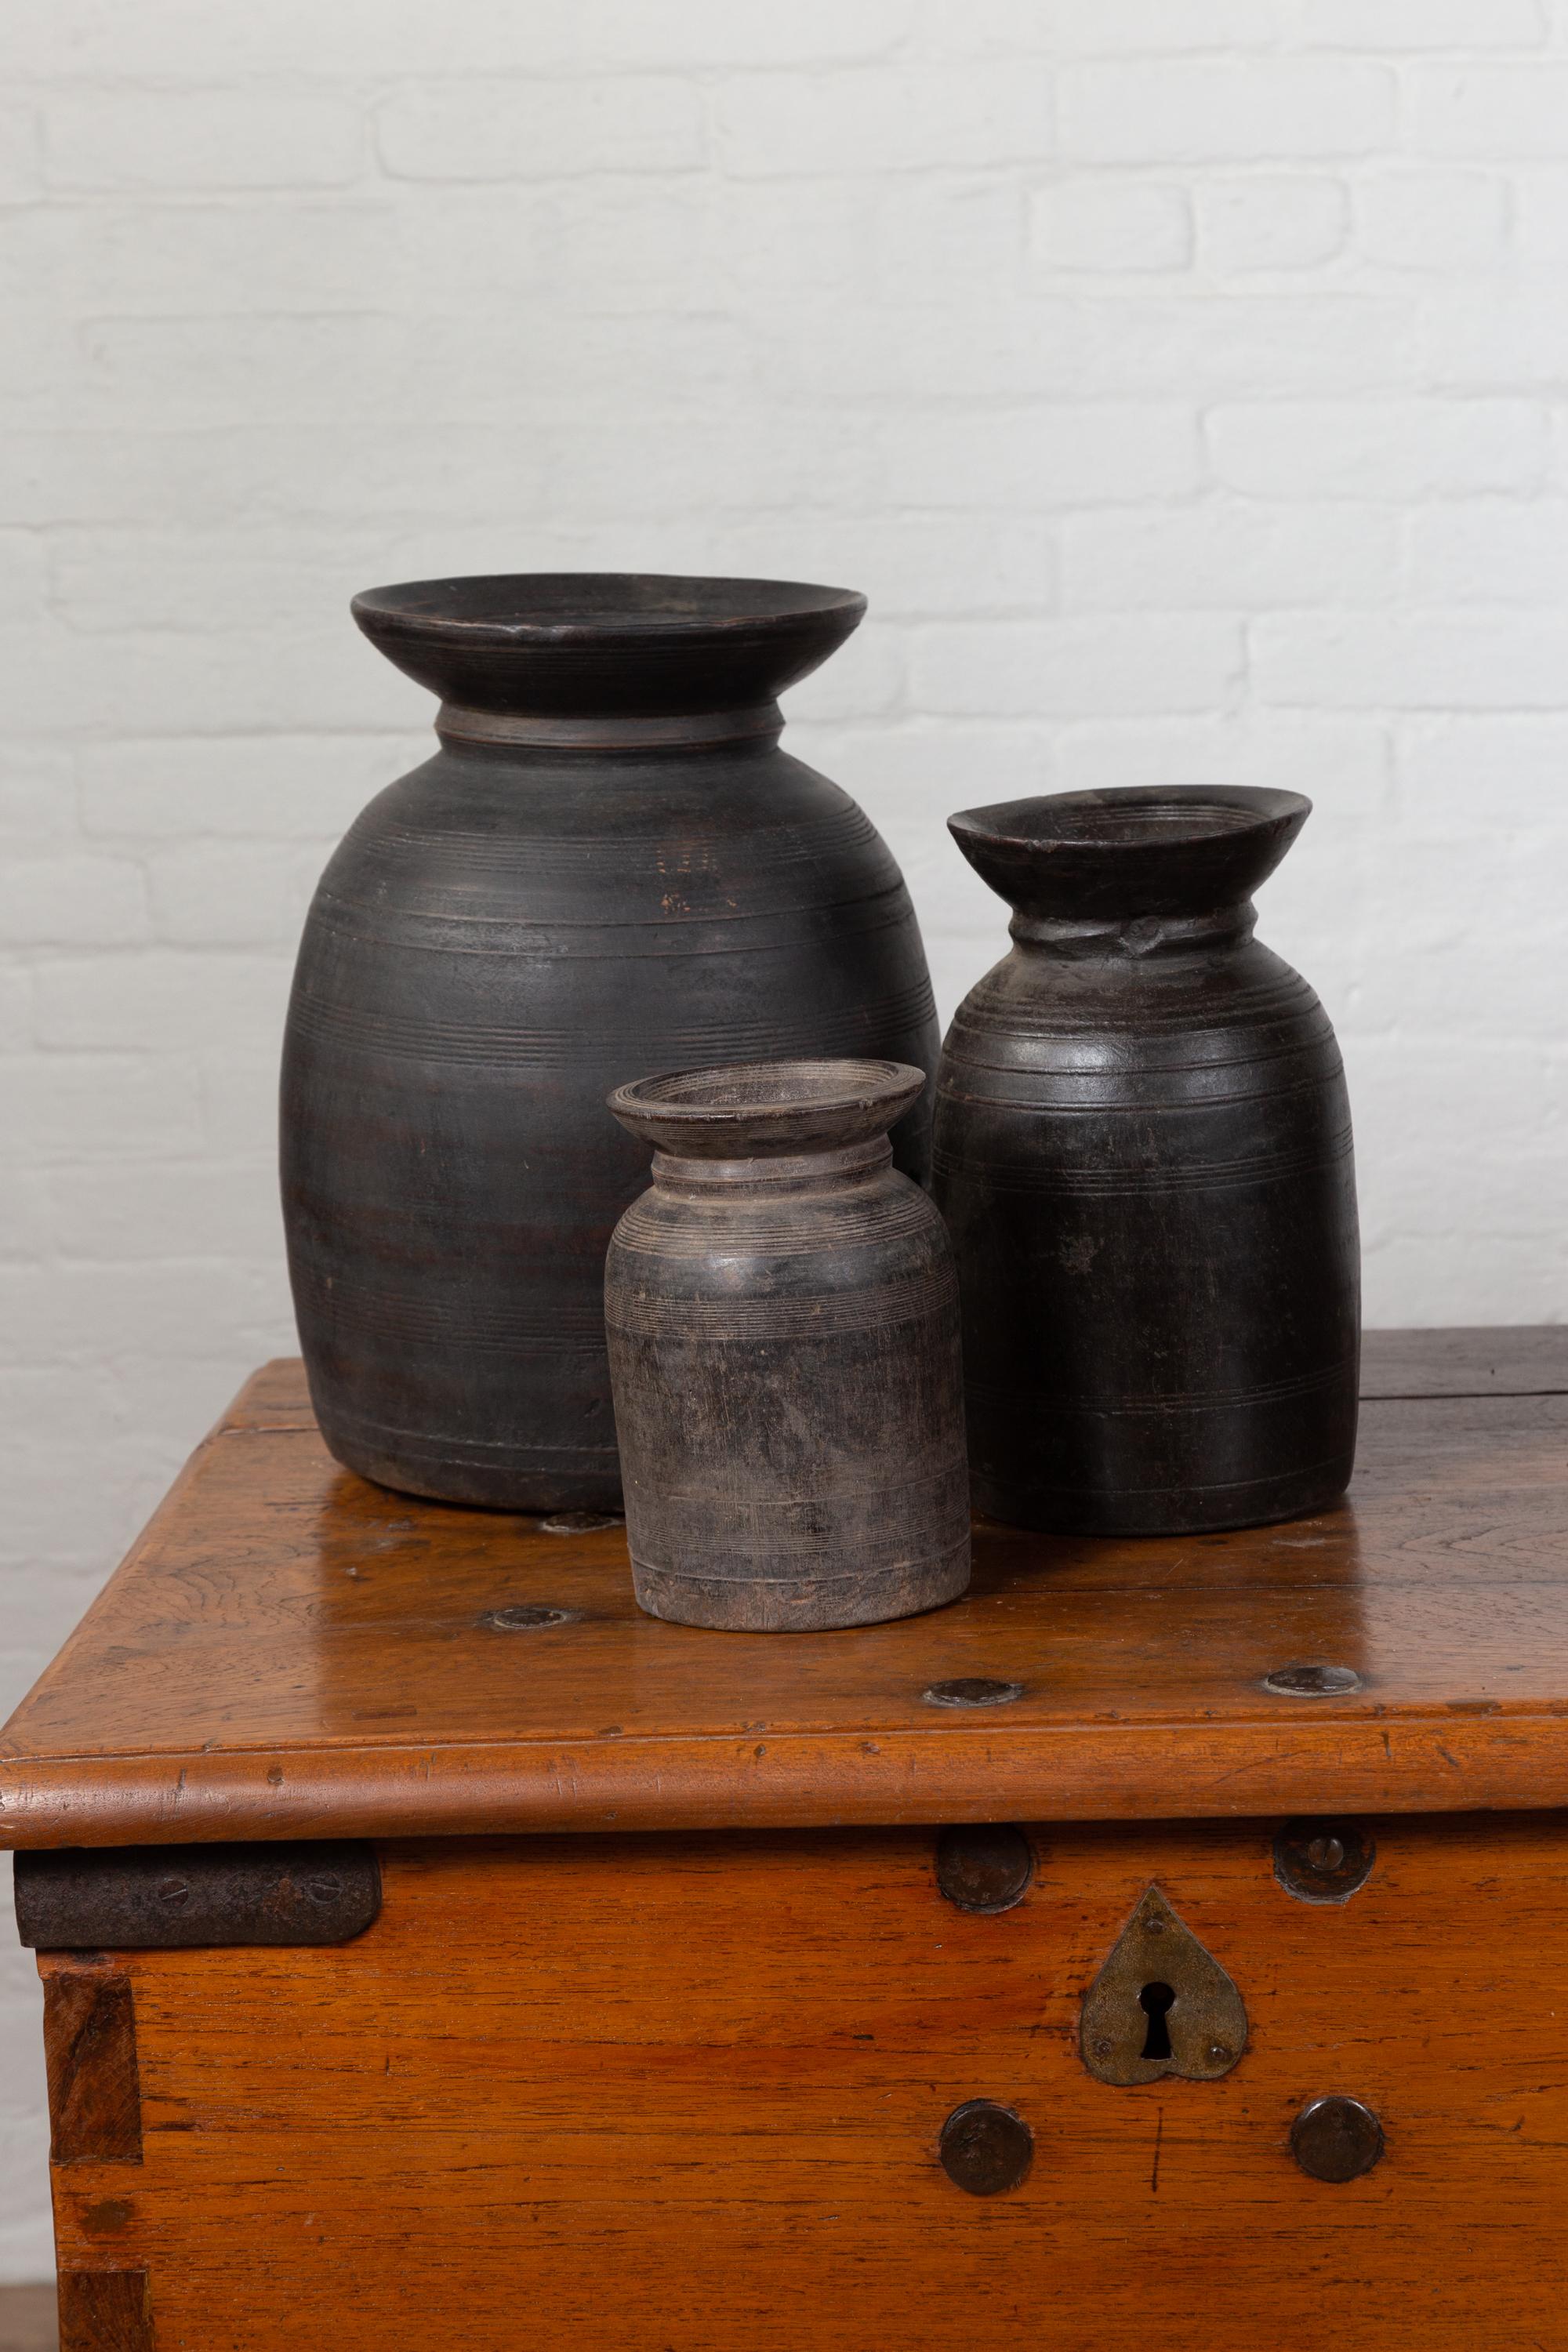 19th Century Nepalese Rustic Wooden Ghee Pots Sold in Sets of Three or Five